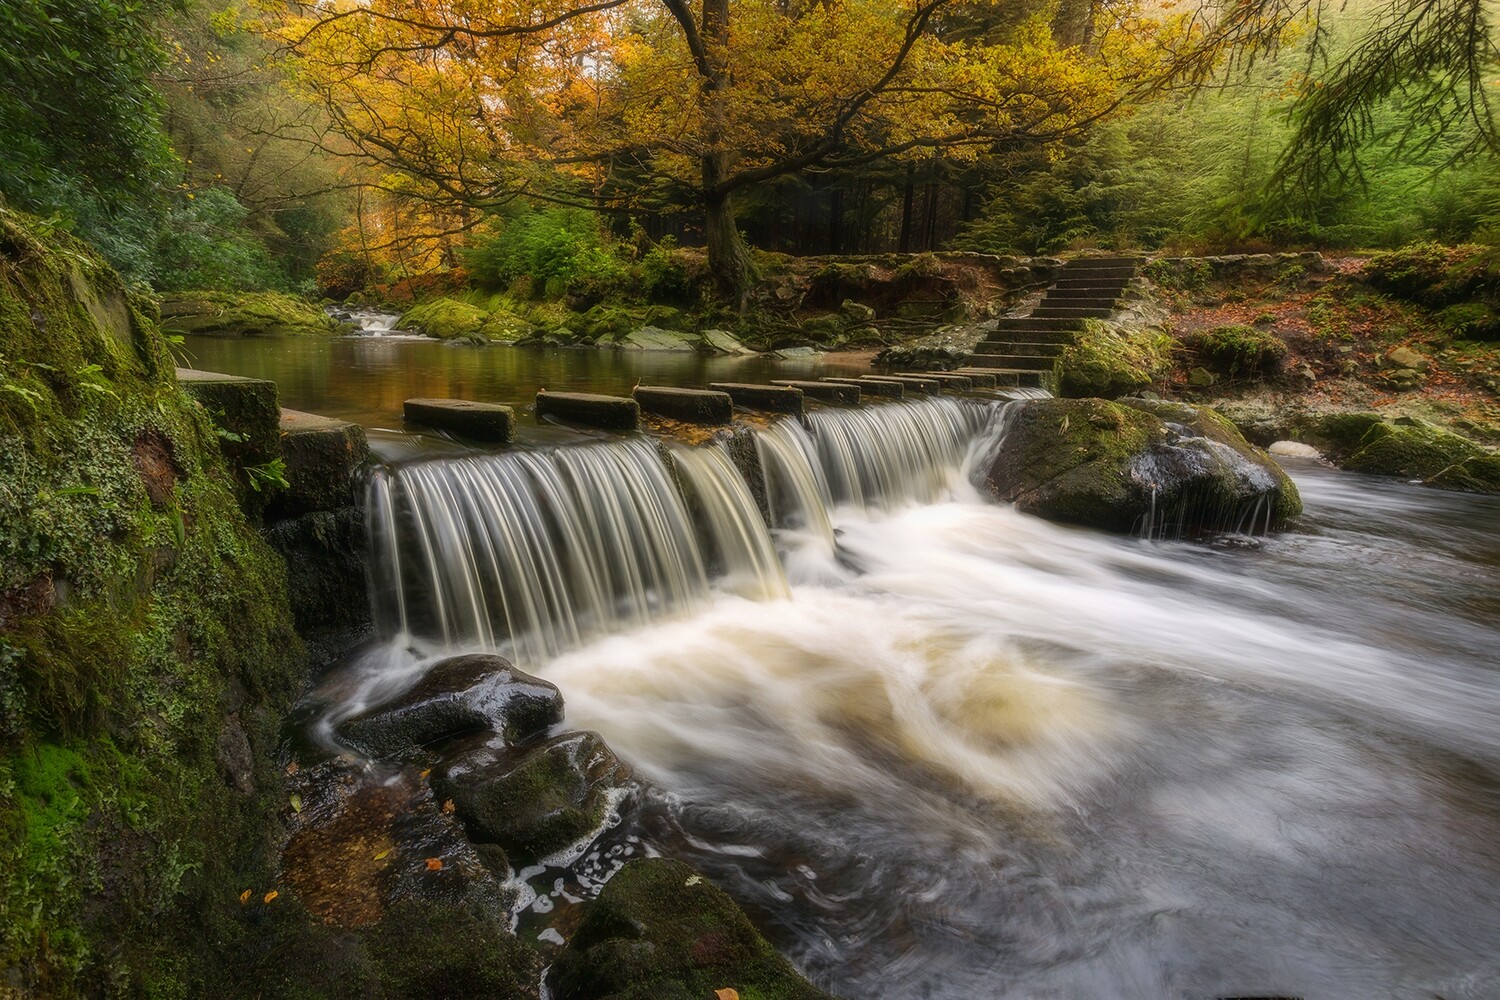 Stepping Stones - Tollymore Forest - Northern Ireland